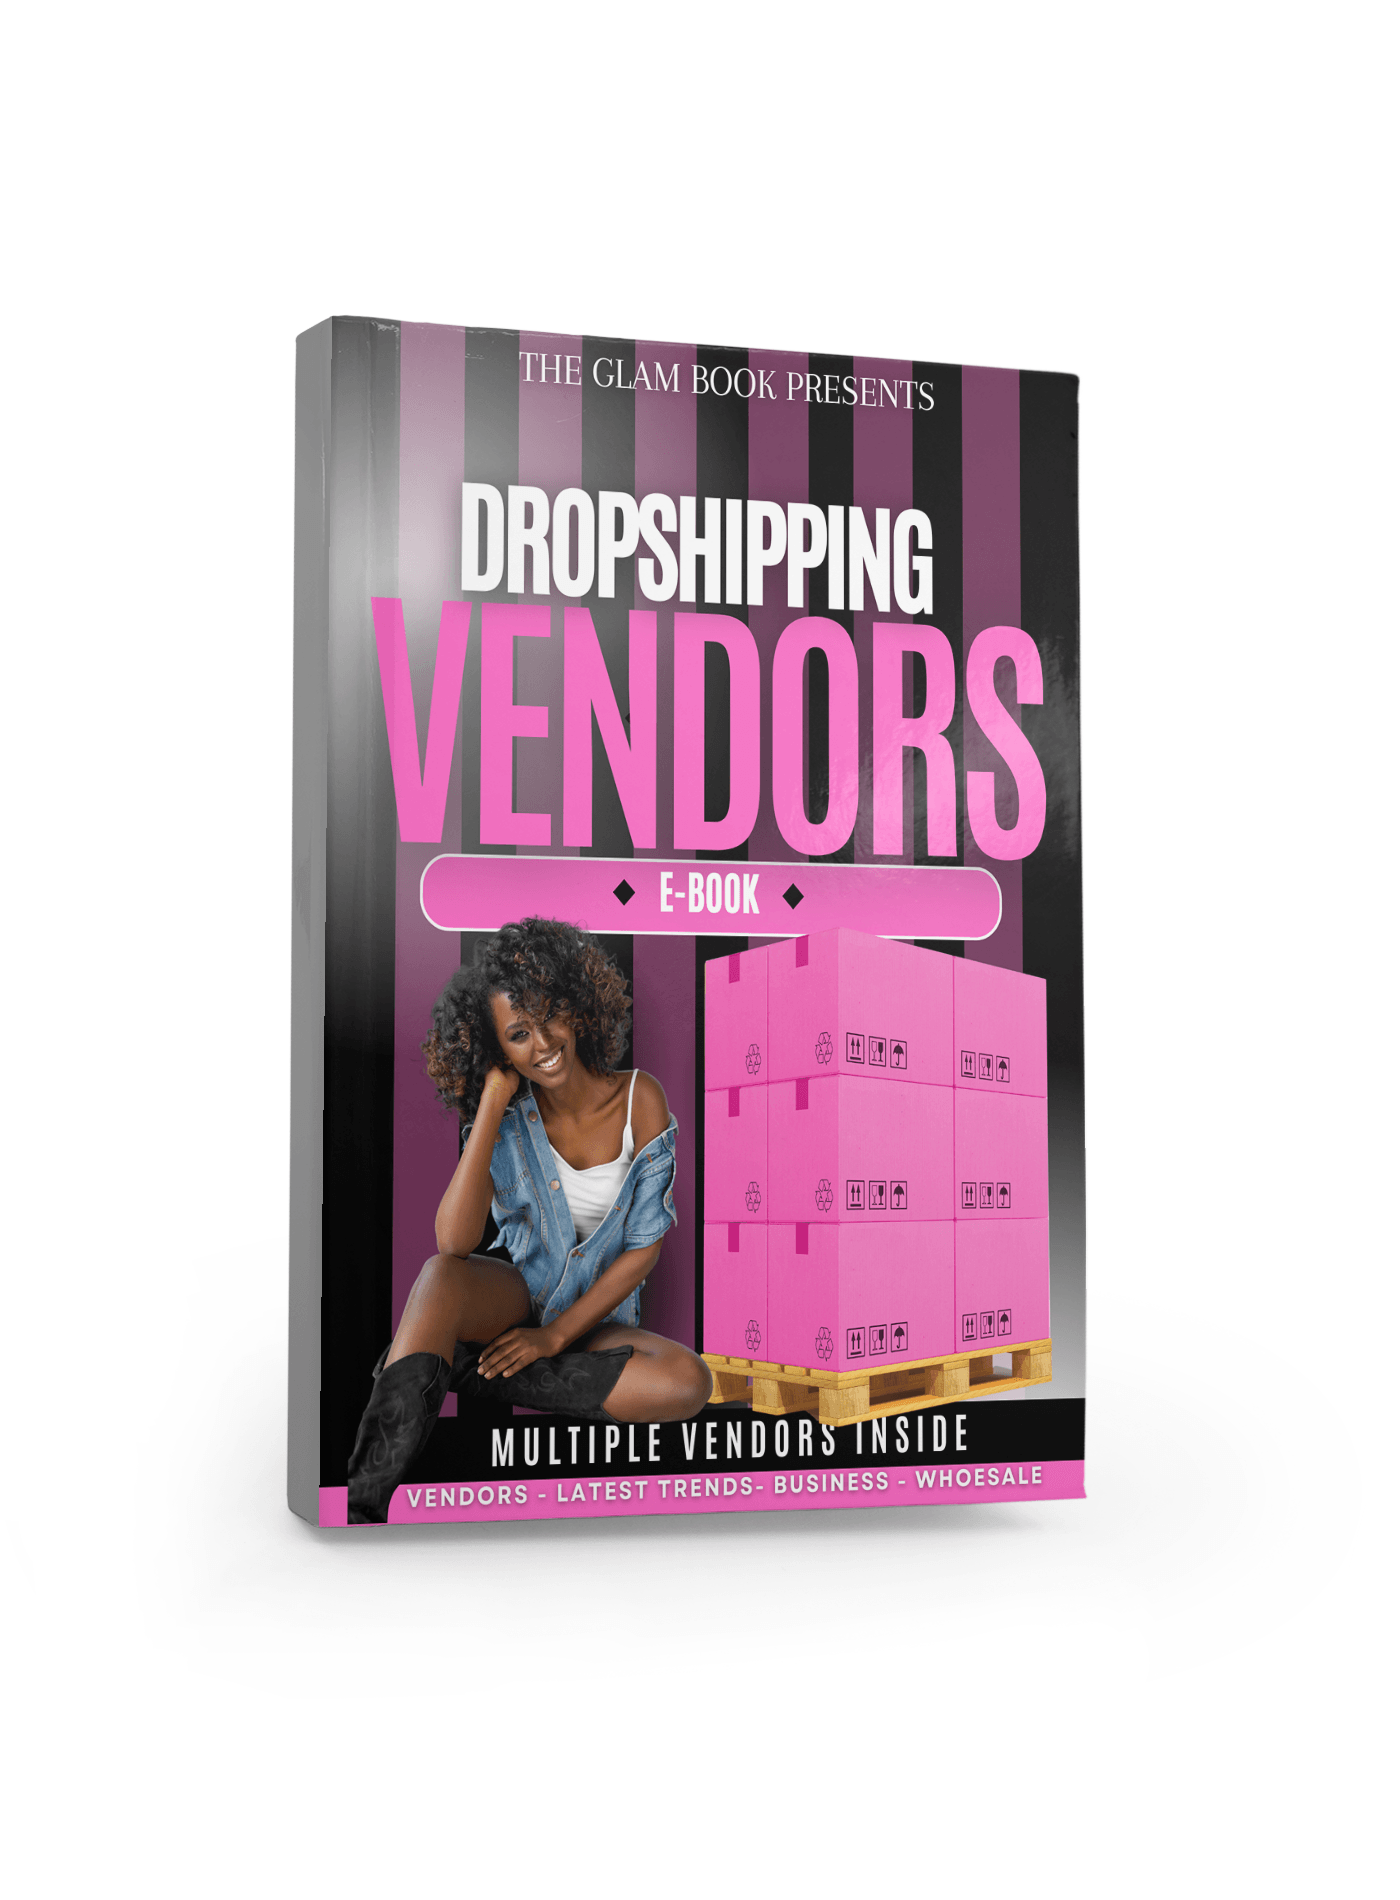 learn how to dropshipping business